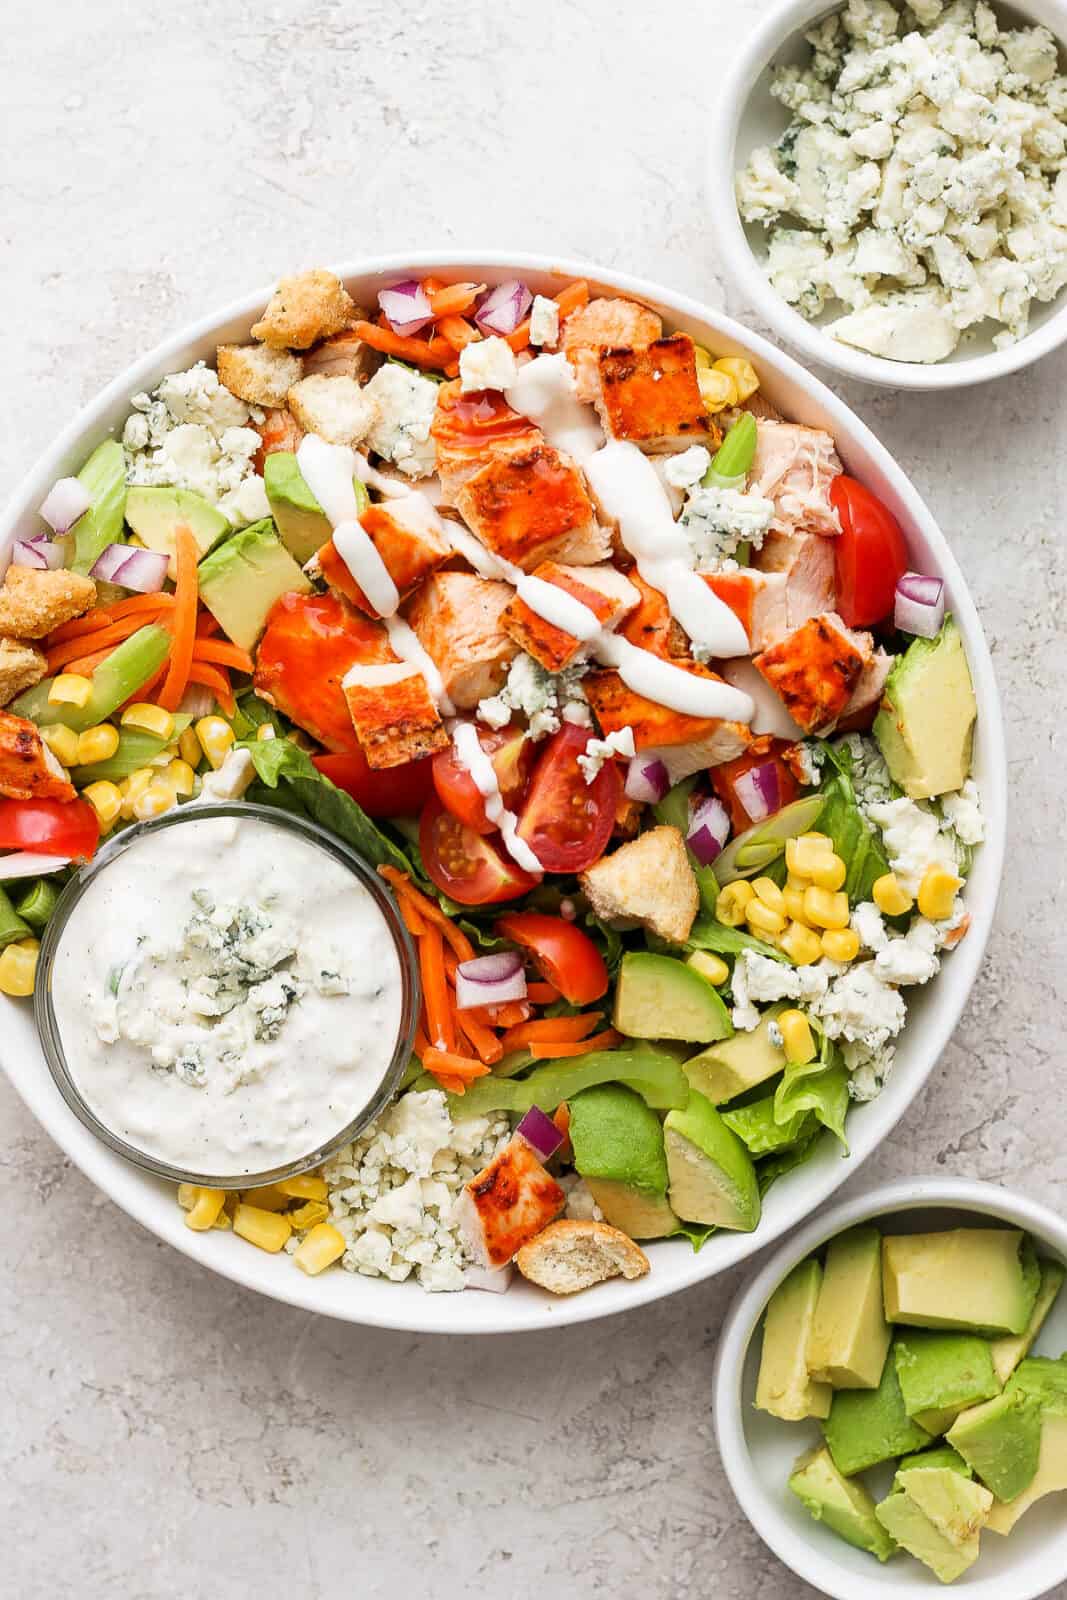 A buffalo chicken salad with small bowls of dressing, avocado, and blue cheese crumbles.